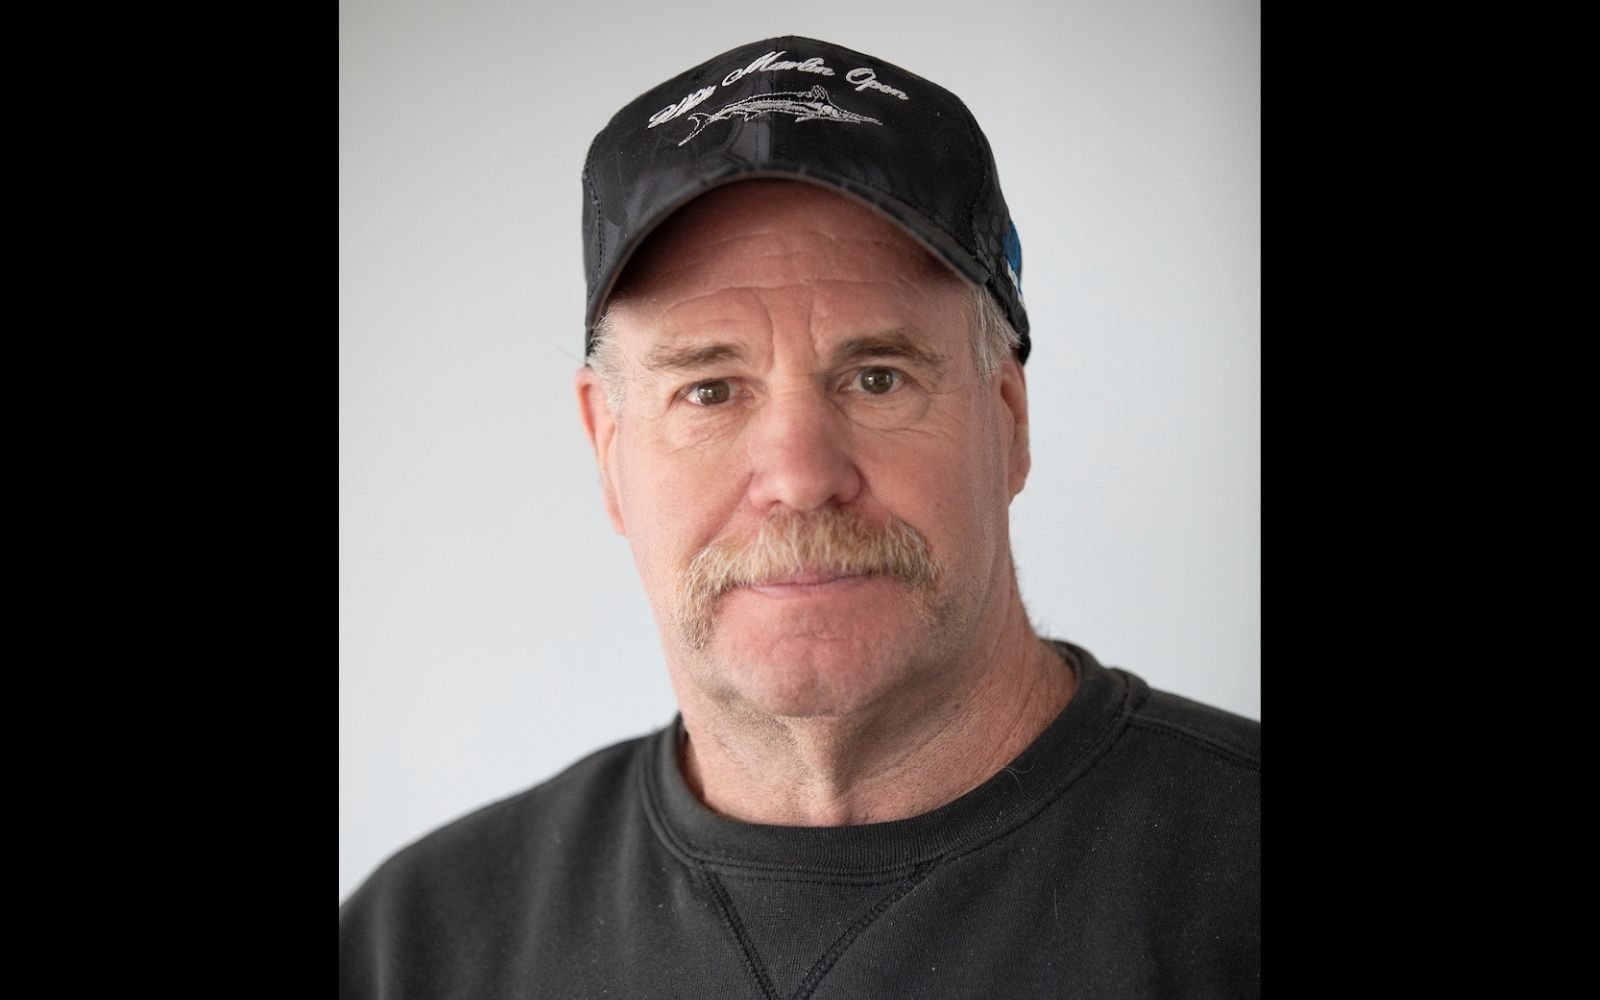 Head shot of a man with a white mustache wearing a black baseball cap and black tee shirt.